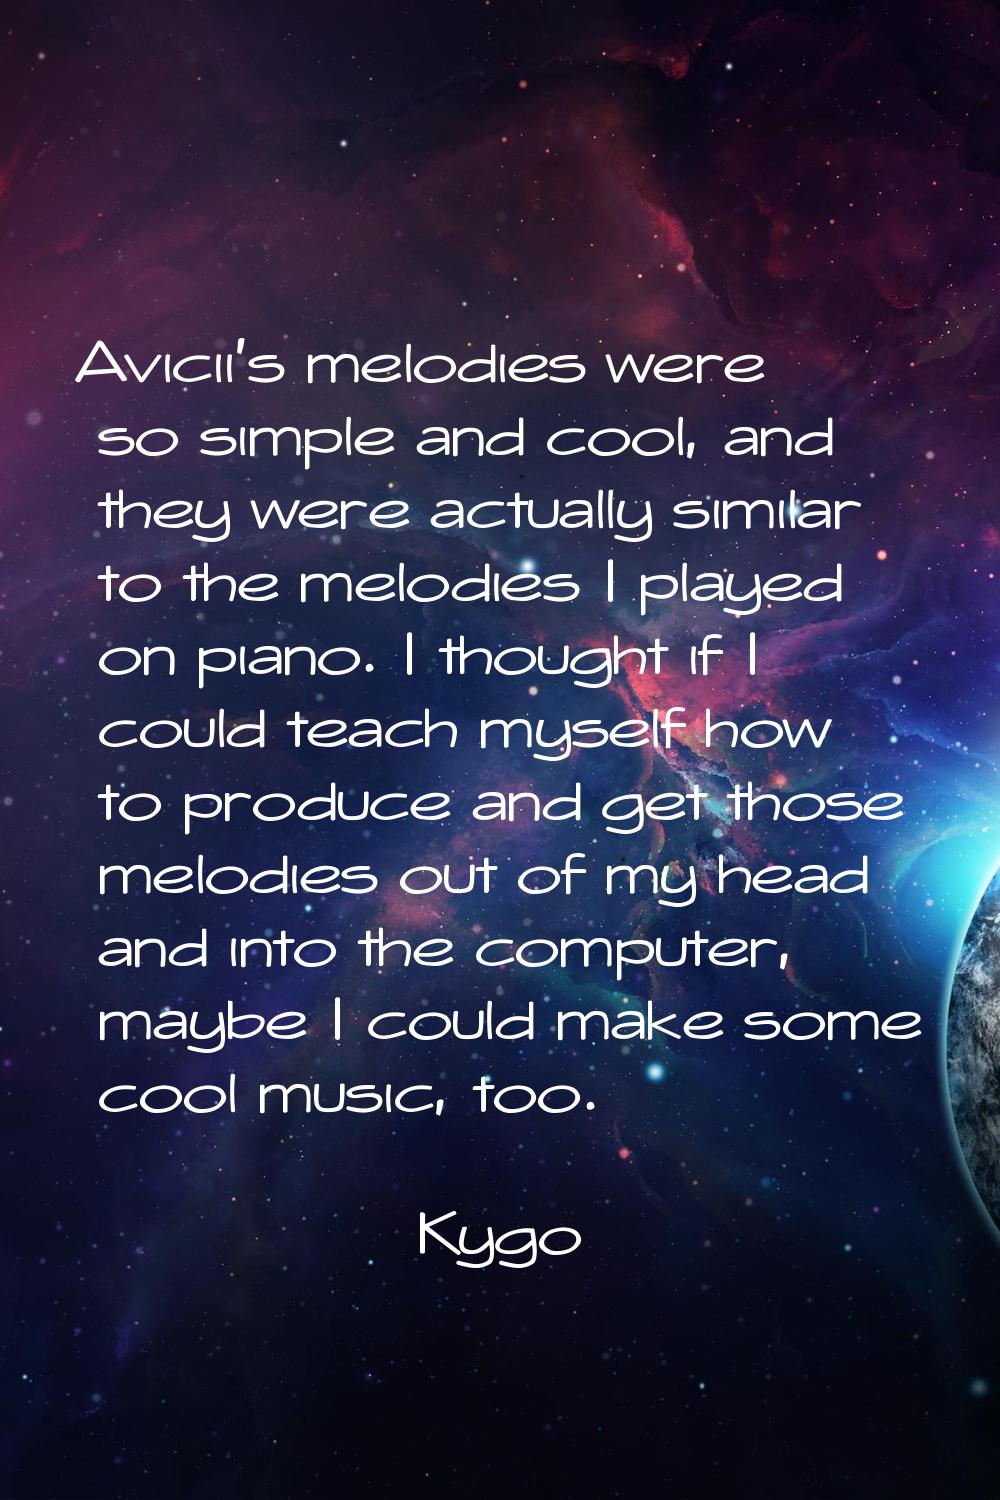 Avicii's melodies were so simple and cool, and they were actually similar to the melodies I played 